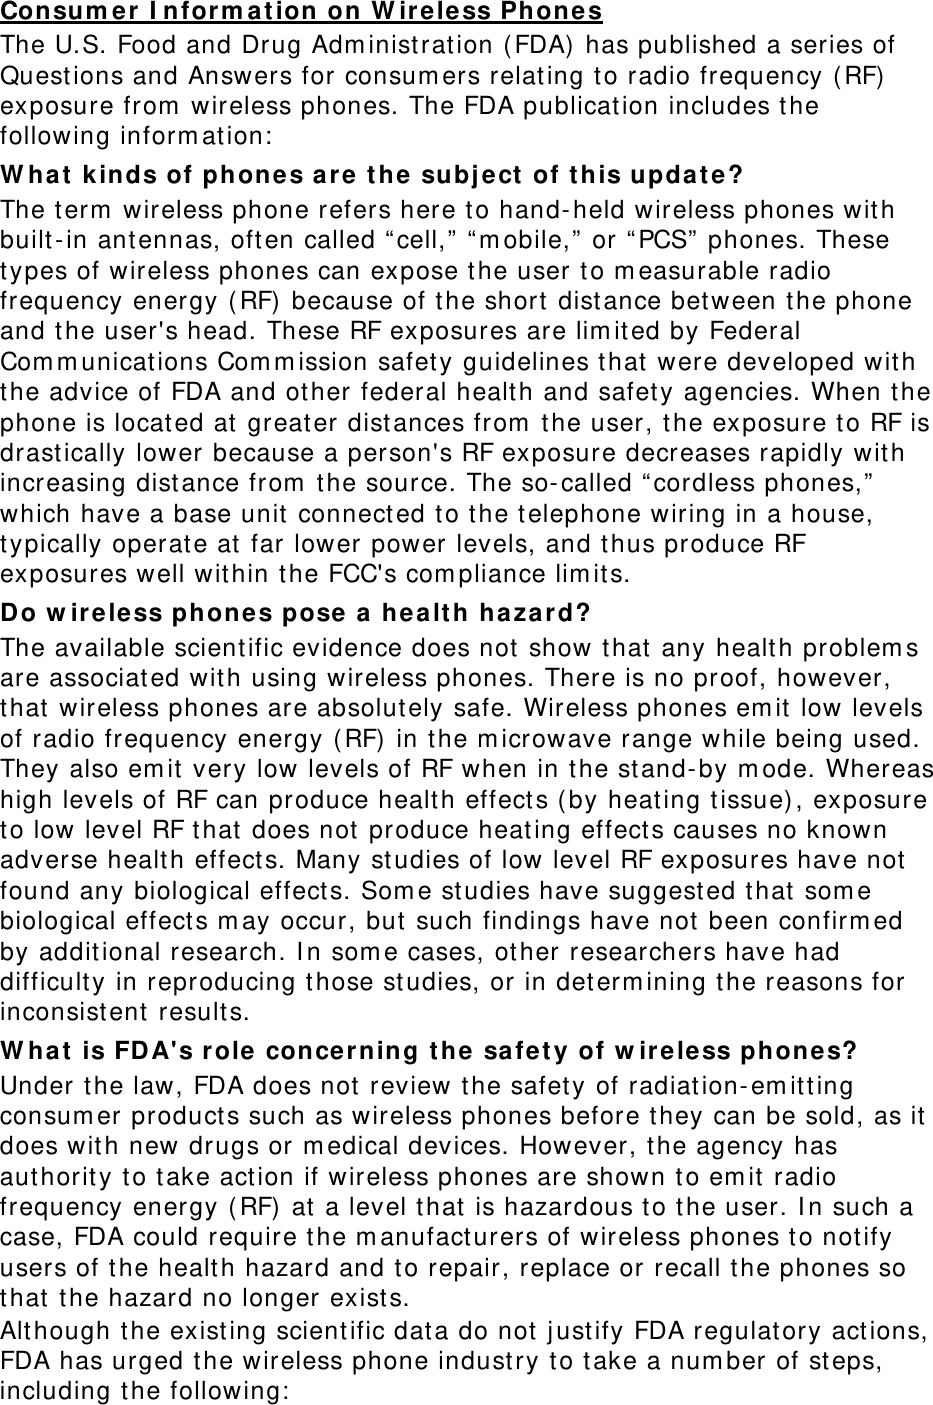 Consum er I nfor m at ion on W ir e le ss Phones The U.S. Food and Drug Adm inist rat ion ( FDA)  has published a series of Quest ions and Answers for consum ers relat ing t o radio frequency ( RF)  exposure from  wireless phones. The FDA publicat ion includes t he following inform at ion:  W hat  k inds of phones a r e  t he subj e ct  of t his upda t e? The t erm  wireless phone refers here t o hand- held wireless phones wit h built- in antennas, often called “ cell,” “ m obile,”  or “ PCS”  phones. These types of wireless phones can expose t he user t o m easurable radio frequency energy ( RF) because of t he short dist ance between the phone and t he user&apos;s head. These RF exposures are lim it ed by Federal Com m unications Com m ission safet y guidelines t hat  were developed wit h the advice of FDA and other federal health and safety agencies. When t he phone is locat ed at  greater distances from  the user, t he exposure t o RF is drast ically lower because a person&apos;s RF exposure decreases rapidly with increasing distance from  the source. The so- called “cordless phones,”  which have a base unit  connect ed t o t he t elephone wiring in a house, typically operat e at  far lower power levels, and t hus produce RF exposures well wit hin t he FCC&apos;s com pliance lim it s. Do w ir e le ss phon e s pose a  healt h hazard? The available scient ific evidence does not  show t hat  any healt h problem s are associat ed wit h using wireless phones. There is no proof, however, that  wireless phones are absolut ely safe. Wireless phones em it  low levels of radio frequency energy ( RF)  in t he m icrowave range while being used. They also em it  very low levels of RF when in t he st and- by m ode. Whereas high levels of RF can produce healt h effect s ( by heat ing t issue) , exposure to low level RF that does not  produce heat ing effect s causes no known adverse healt h effect s. Many st udies of low level RF exposures have not  found any biological effect s. Som e st udies have suggest ed t hat  som e biological effects m ay occur, but such findings have not  been confirm ed by addit ional research. I n som e cases, other researchers have had difficult y in reproducing t hose st udies, or in det erm ining t he reasons for inconsist ent result s. W hat  is FDA&apos;s r ole concerning t he safety of w ireless phones? Under t he law, FDA does not  review t he safet y of radiat ion- em it t ing consum er product s such as wireless phones before t hey can be sold, as it  does with new drugs or m edical devices. However, t he agency has aut horit y t o take action if wireless phones are shown t o em it  radio frequency energy ( RF) at  a level that is hazardous to the user. I n such a case, FDA could require t he m anufact urers of wireless phones t o not ify users of t he healt h hazard and t o repair, replace or recall t he phones so that  the hazard no longer exist s. Although t he exist ing scientific dat a do not  j ust ify FDA regulat ory act ions, FDA has urged t he wireless phone indust ry t o t ake a num ber of st eps, including t he following:  